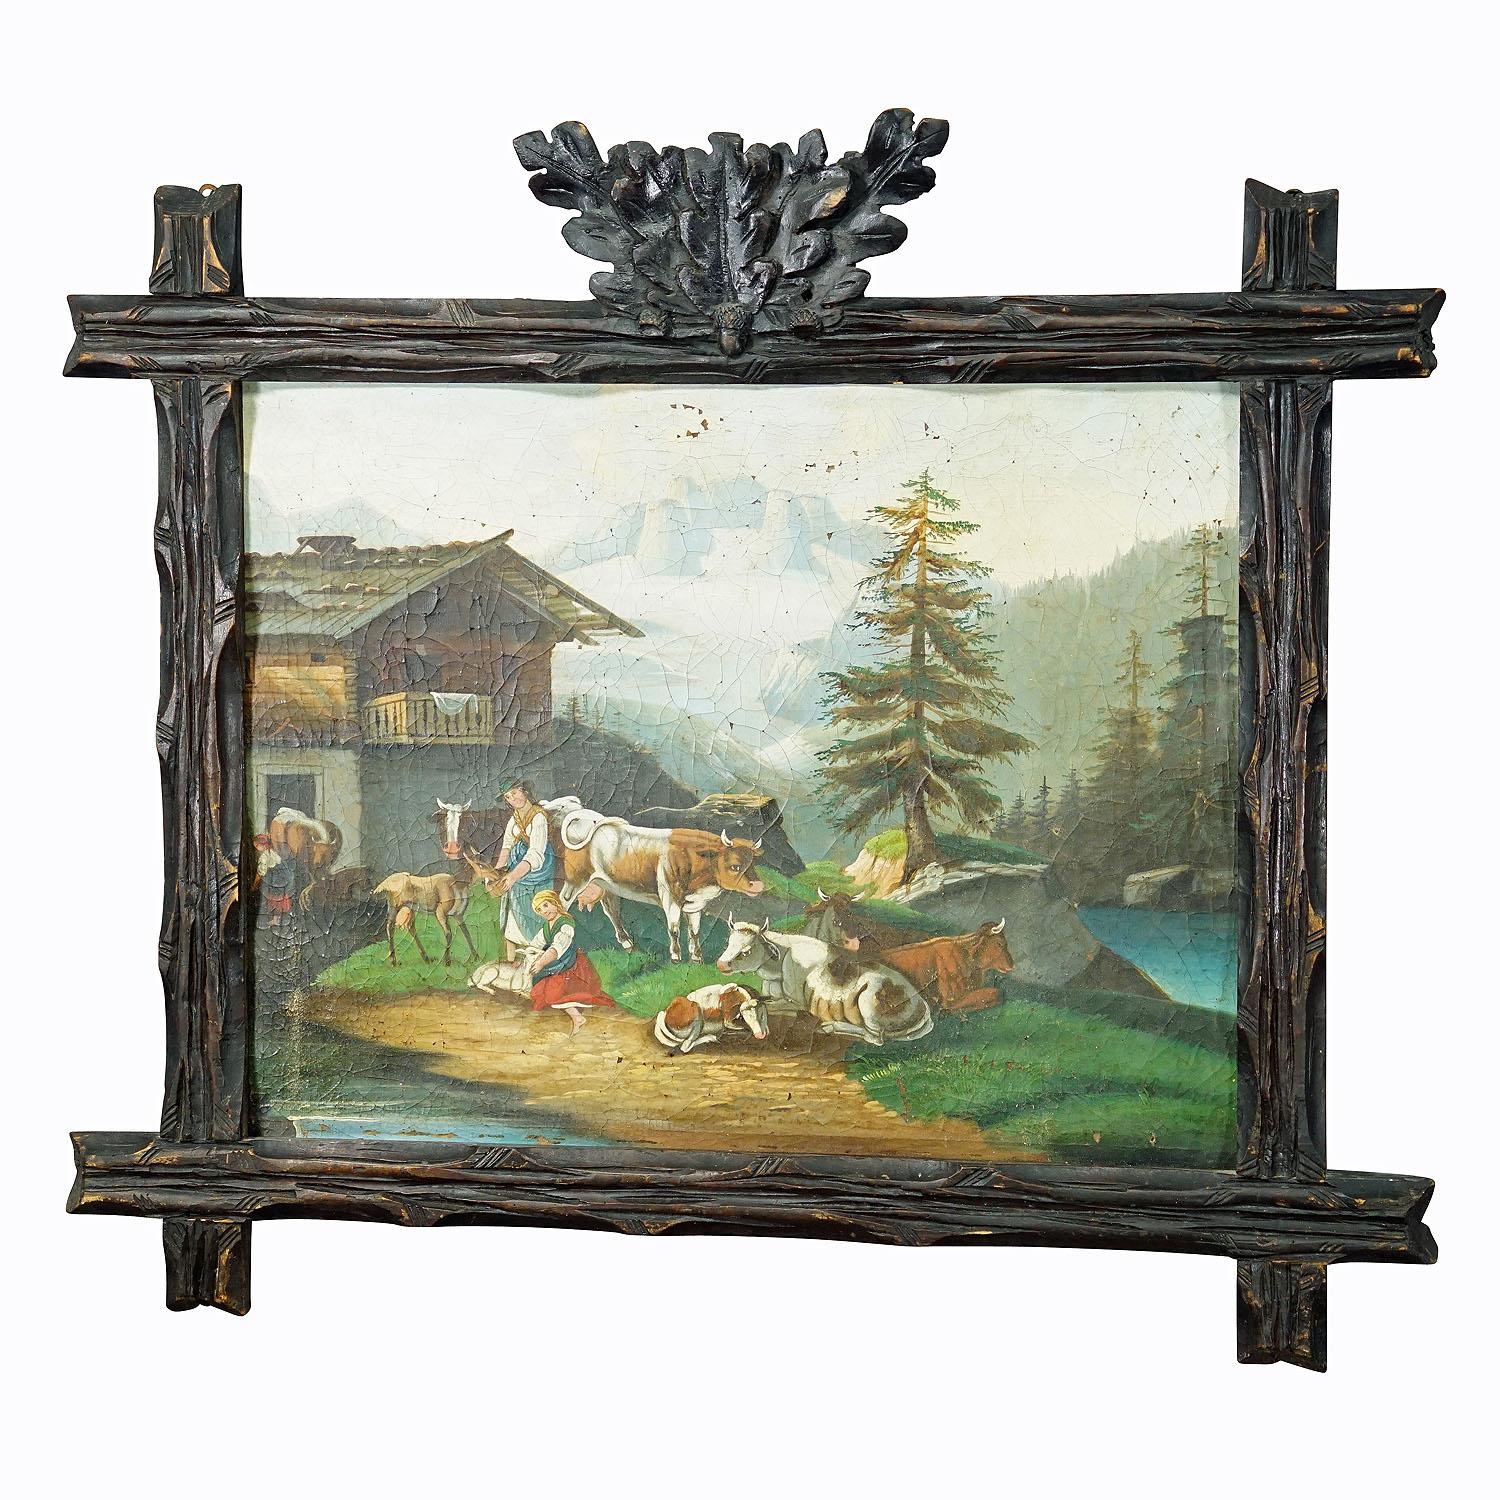 Oil painting folksy scenery with cattles, goats and farmer's wifes, ca. 1900s

A colorful antique oil painting depicting a bavarian farmers family with their cattles and goats. The scene is located beside an mountain lake in the alpine landscape.